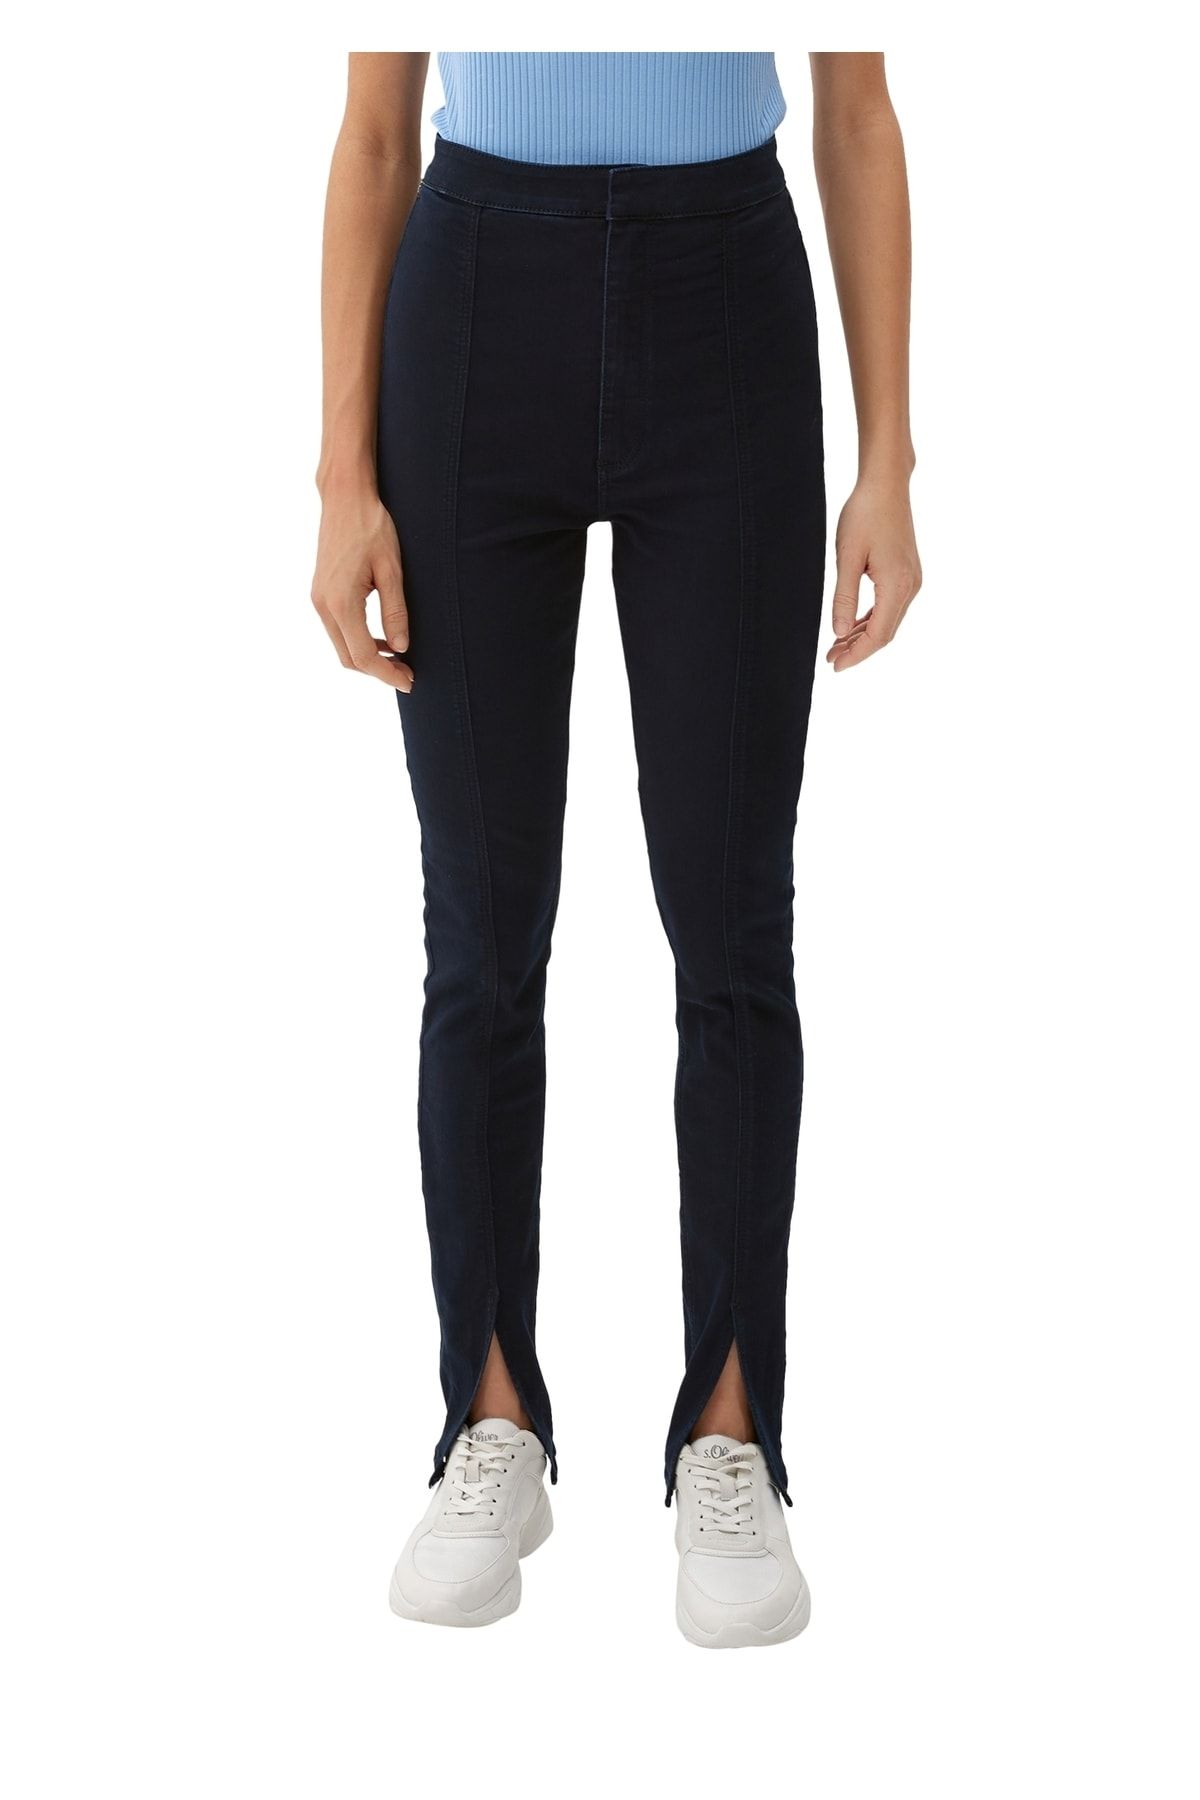 QS by s.Oliver Jeans - Schwarz - Bootcut - Trendyol